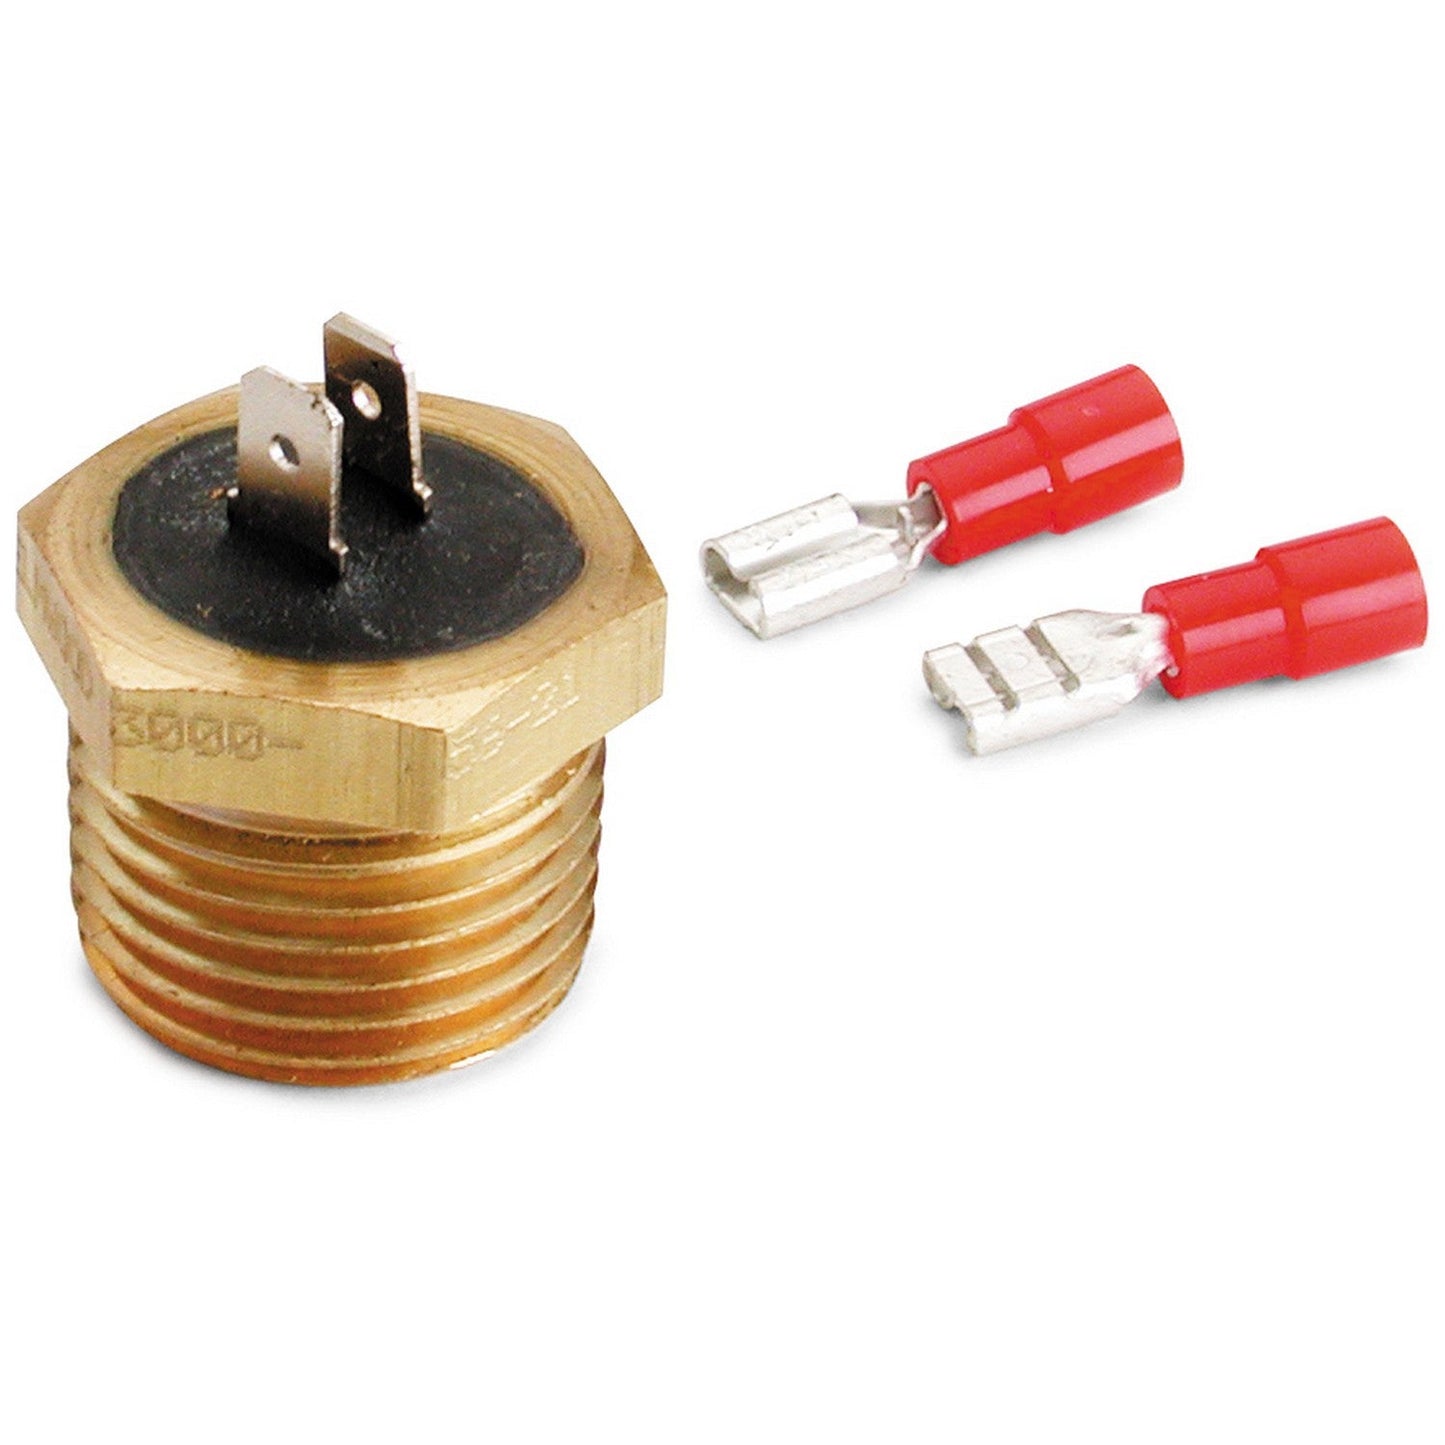 AutoMeter - TEMPERATURE SWITCH, 200 °F, 1/2" NPT MALE, FOR PRO-LITE WARNING LIGHT (3246)